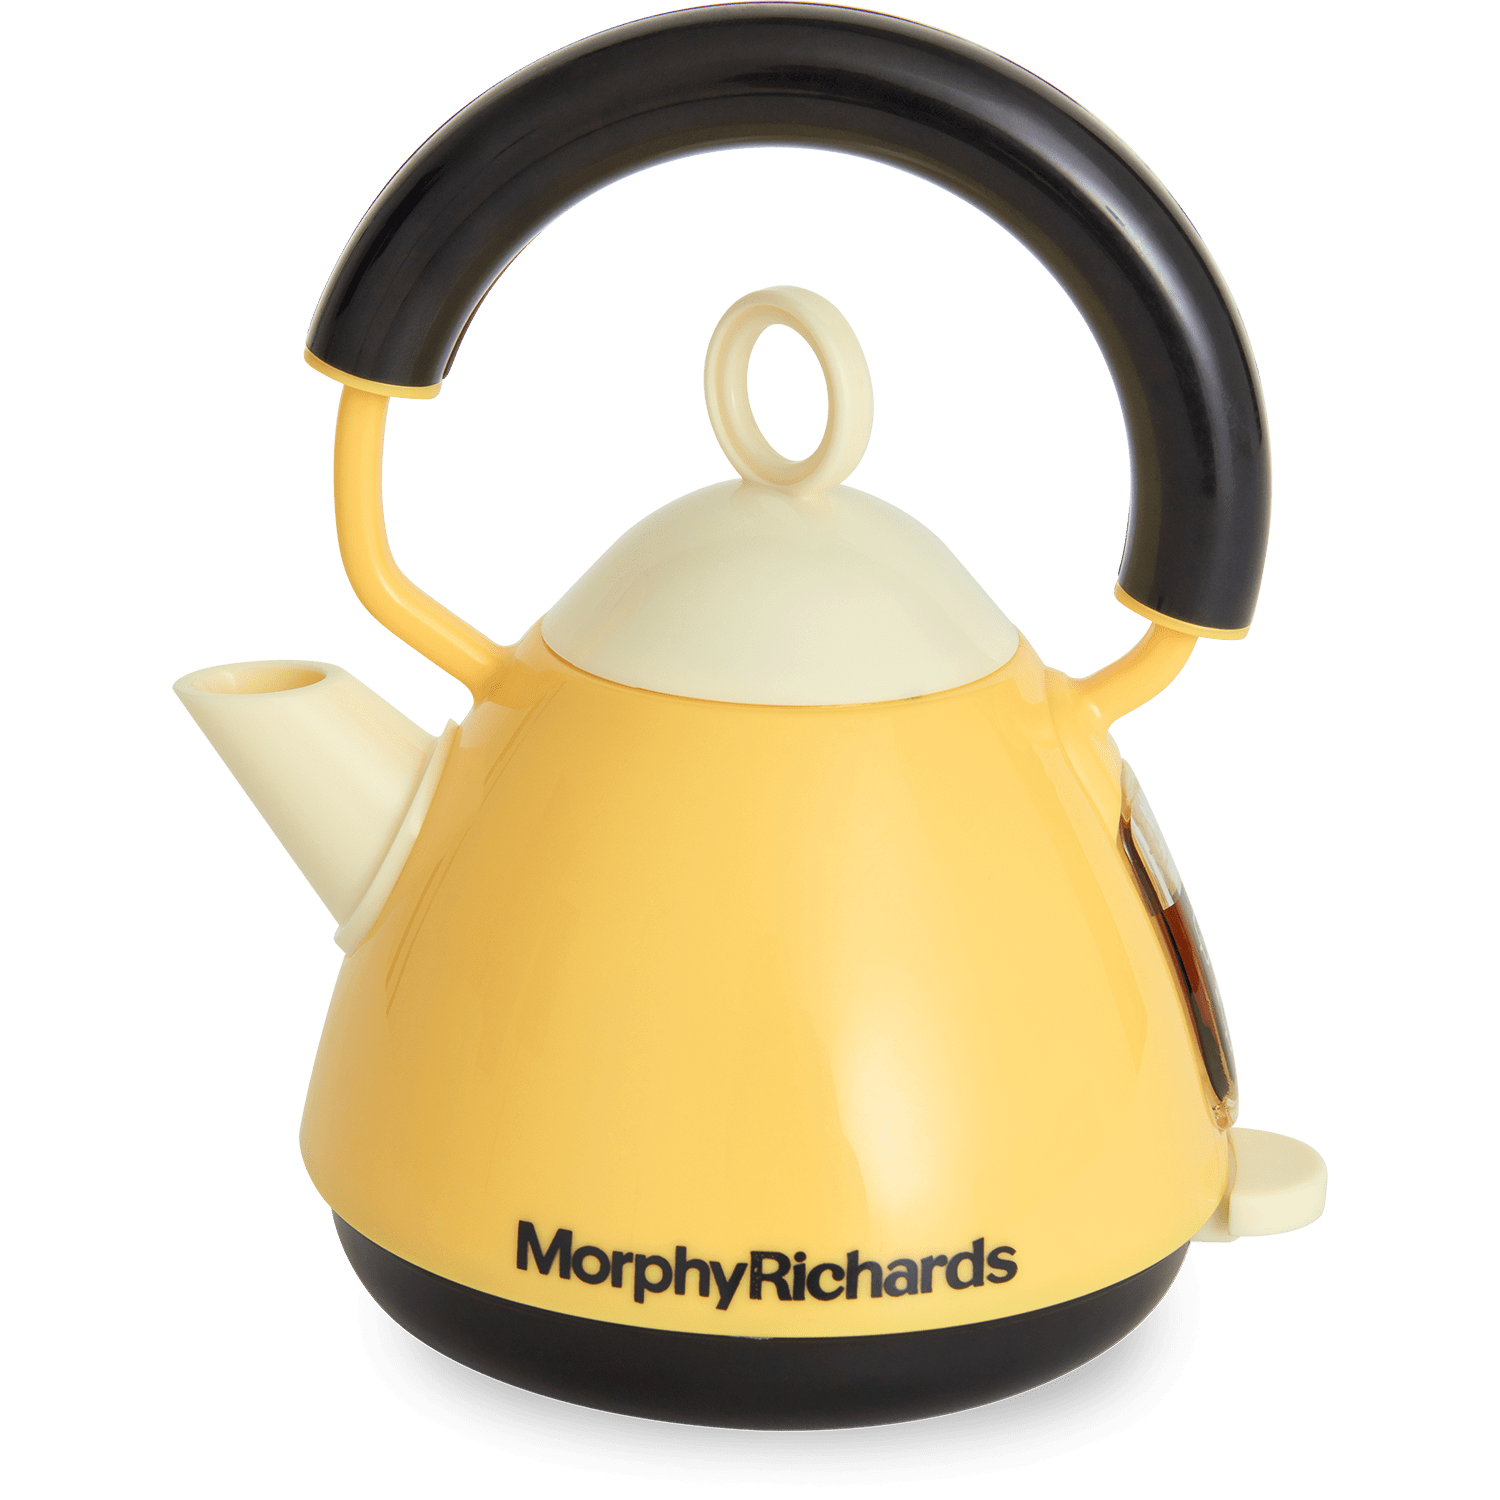 Morphy Richards products